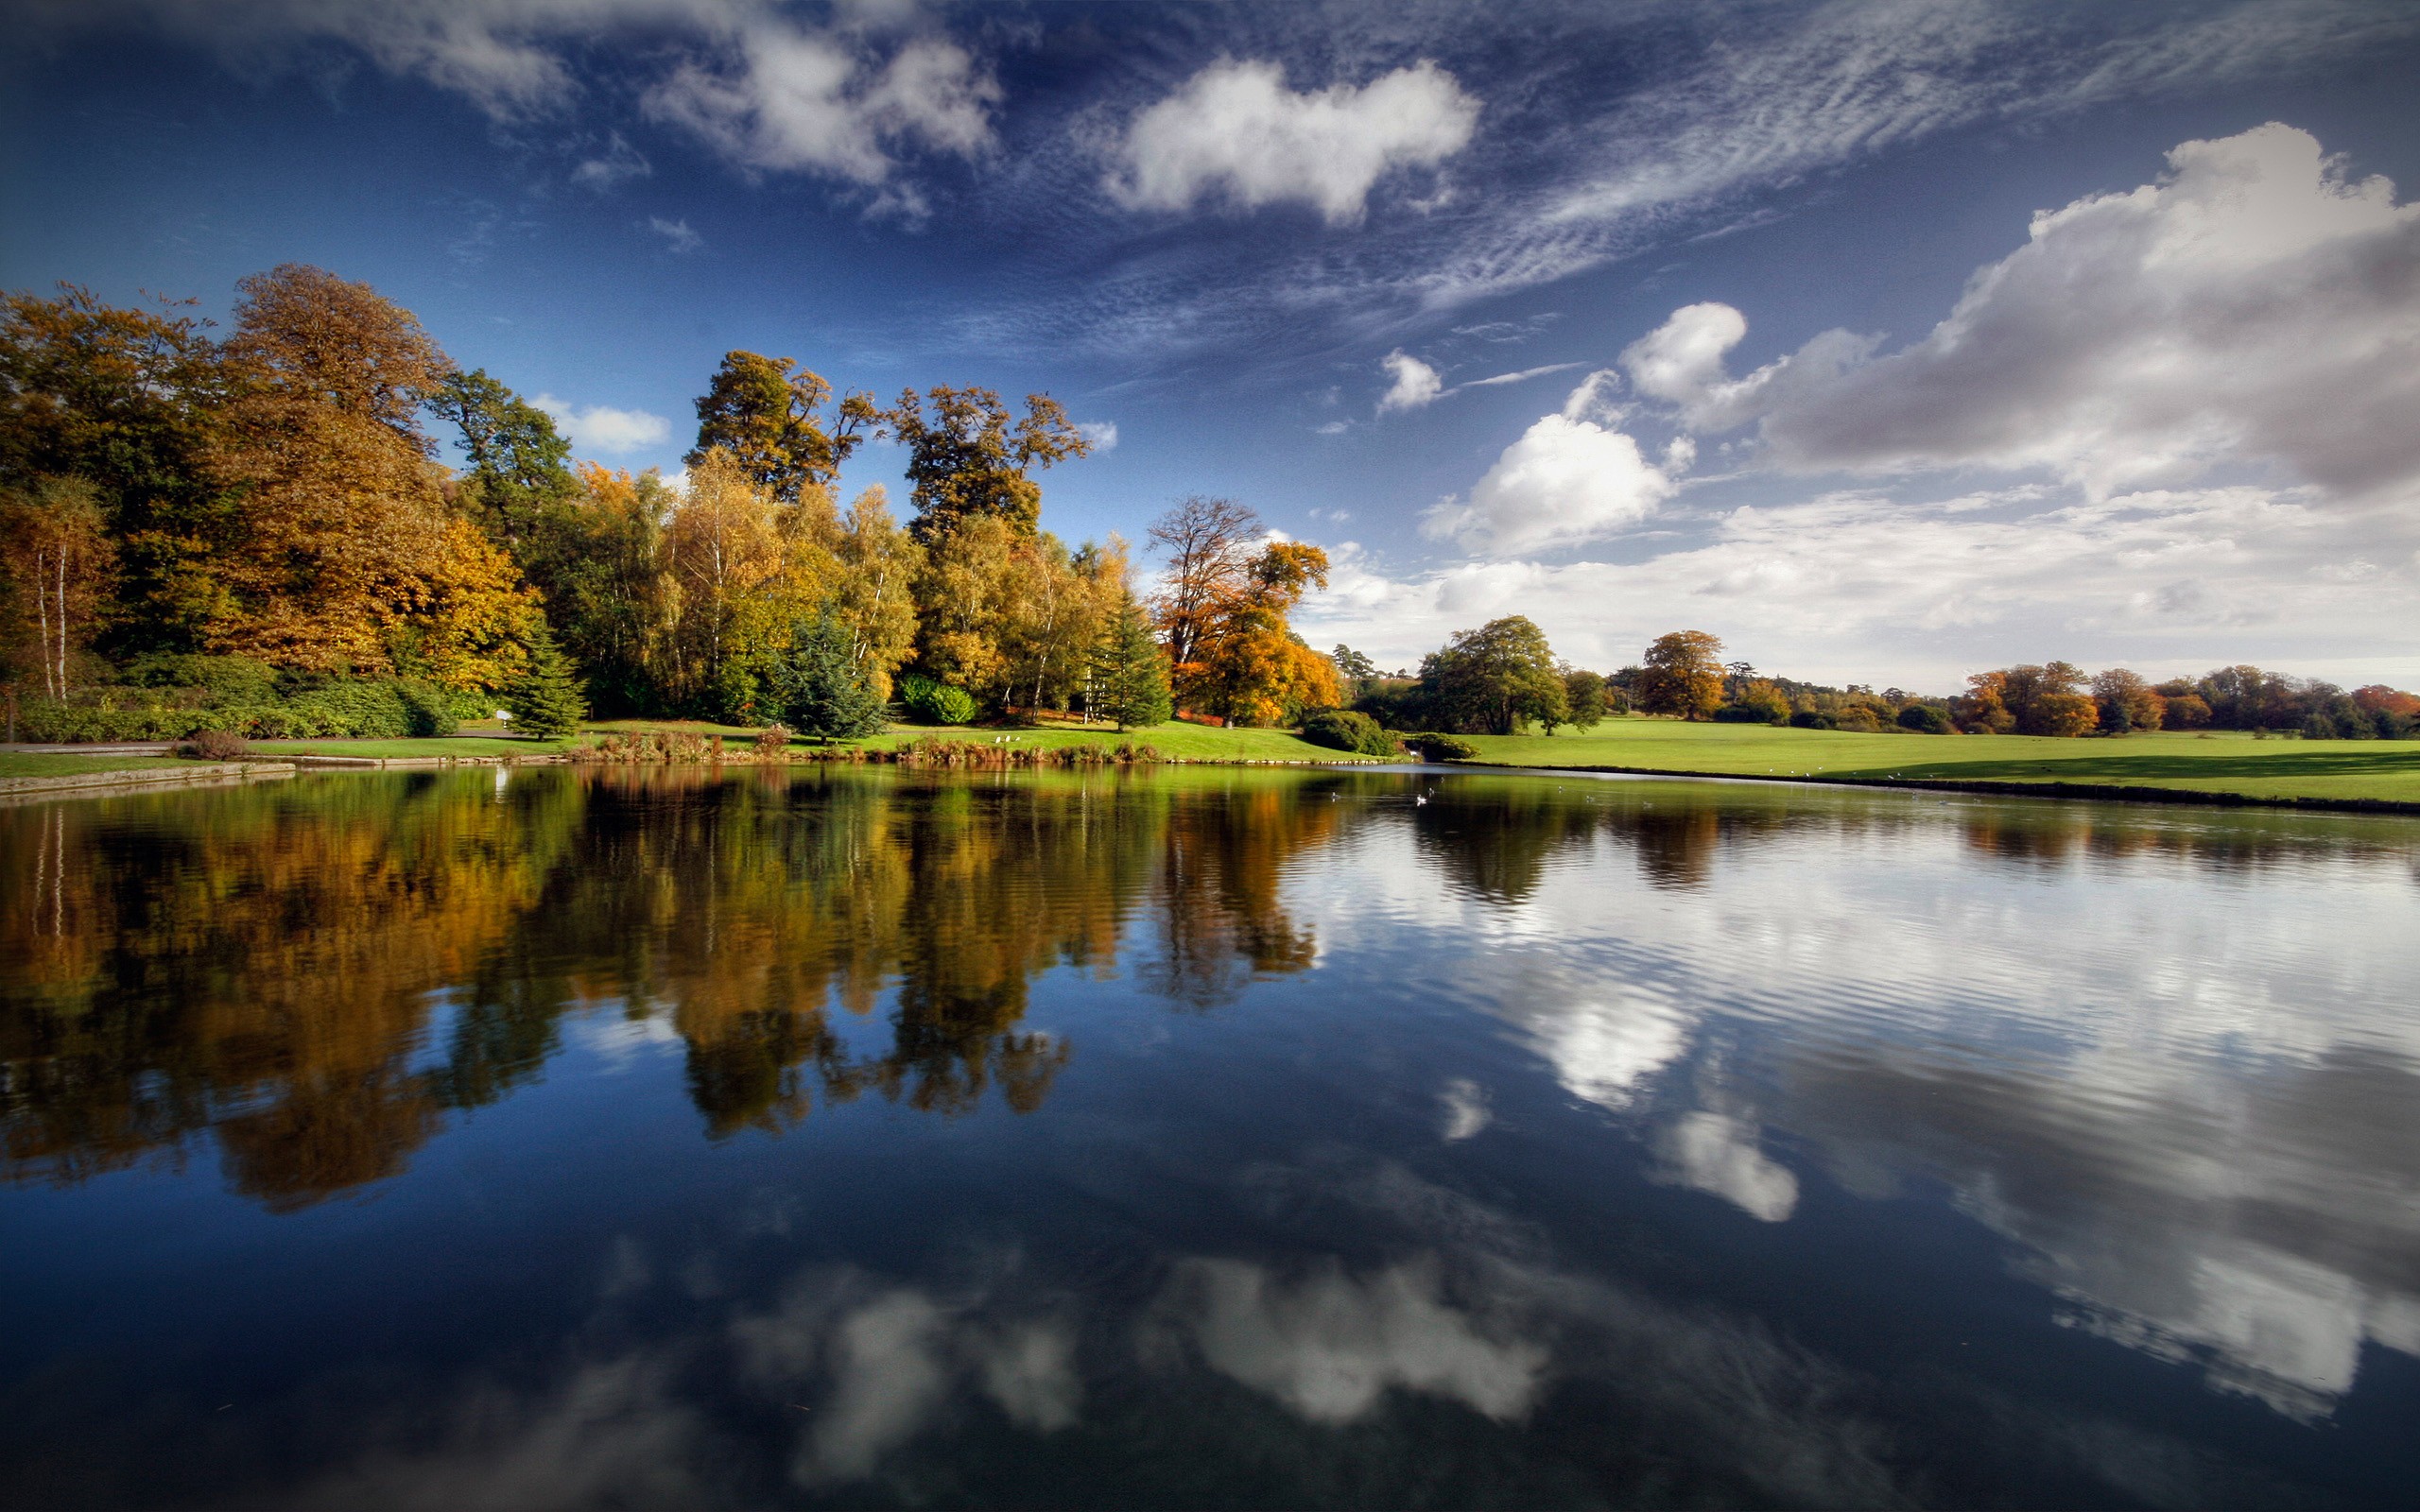 General 2560x1600 nature HDR landscape lake reflection sky trees water clouds